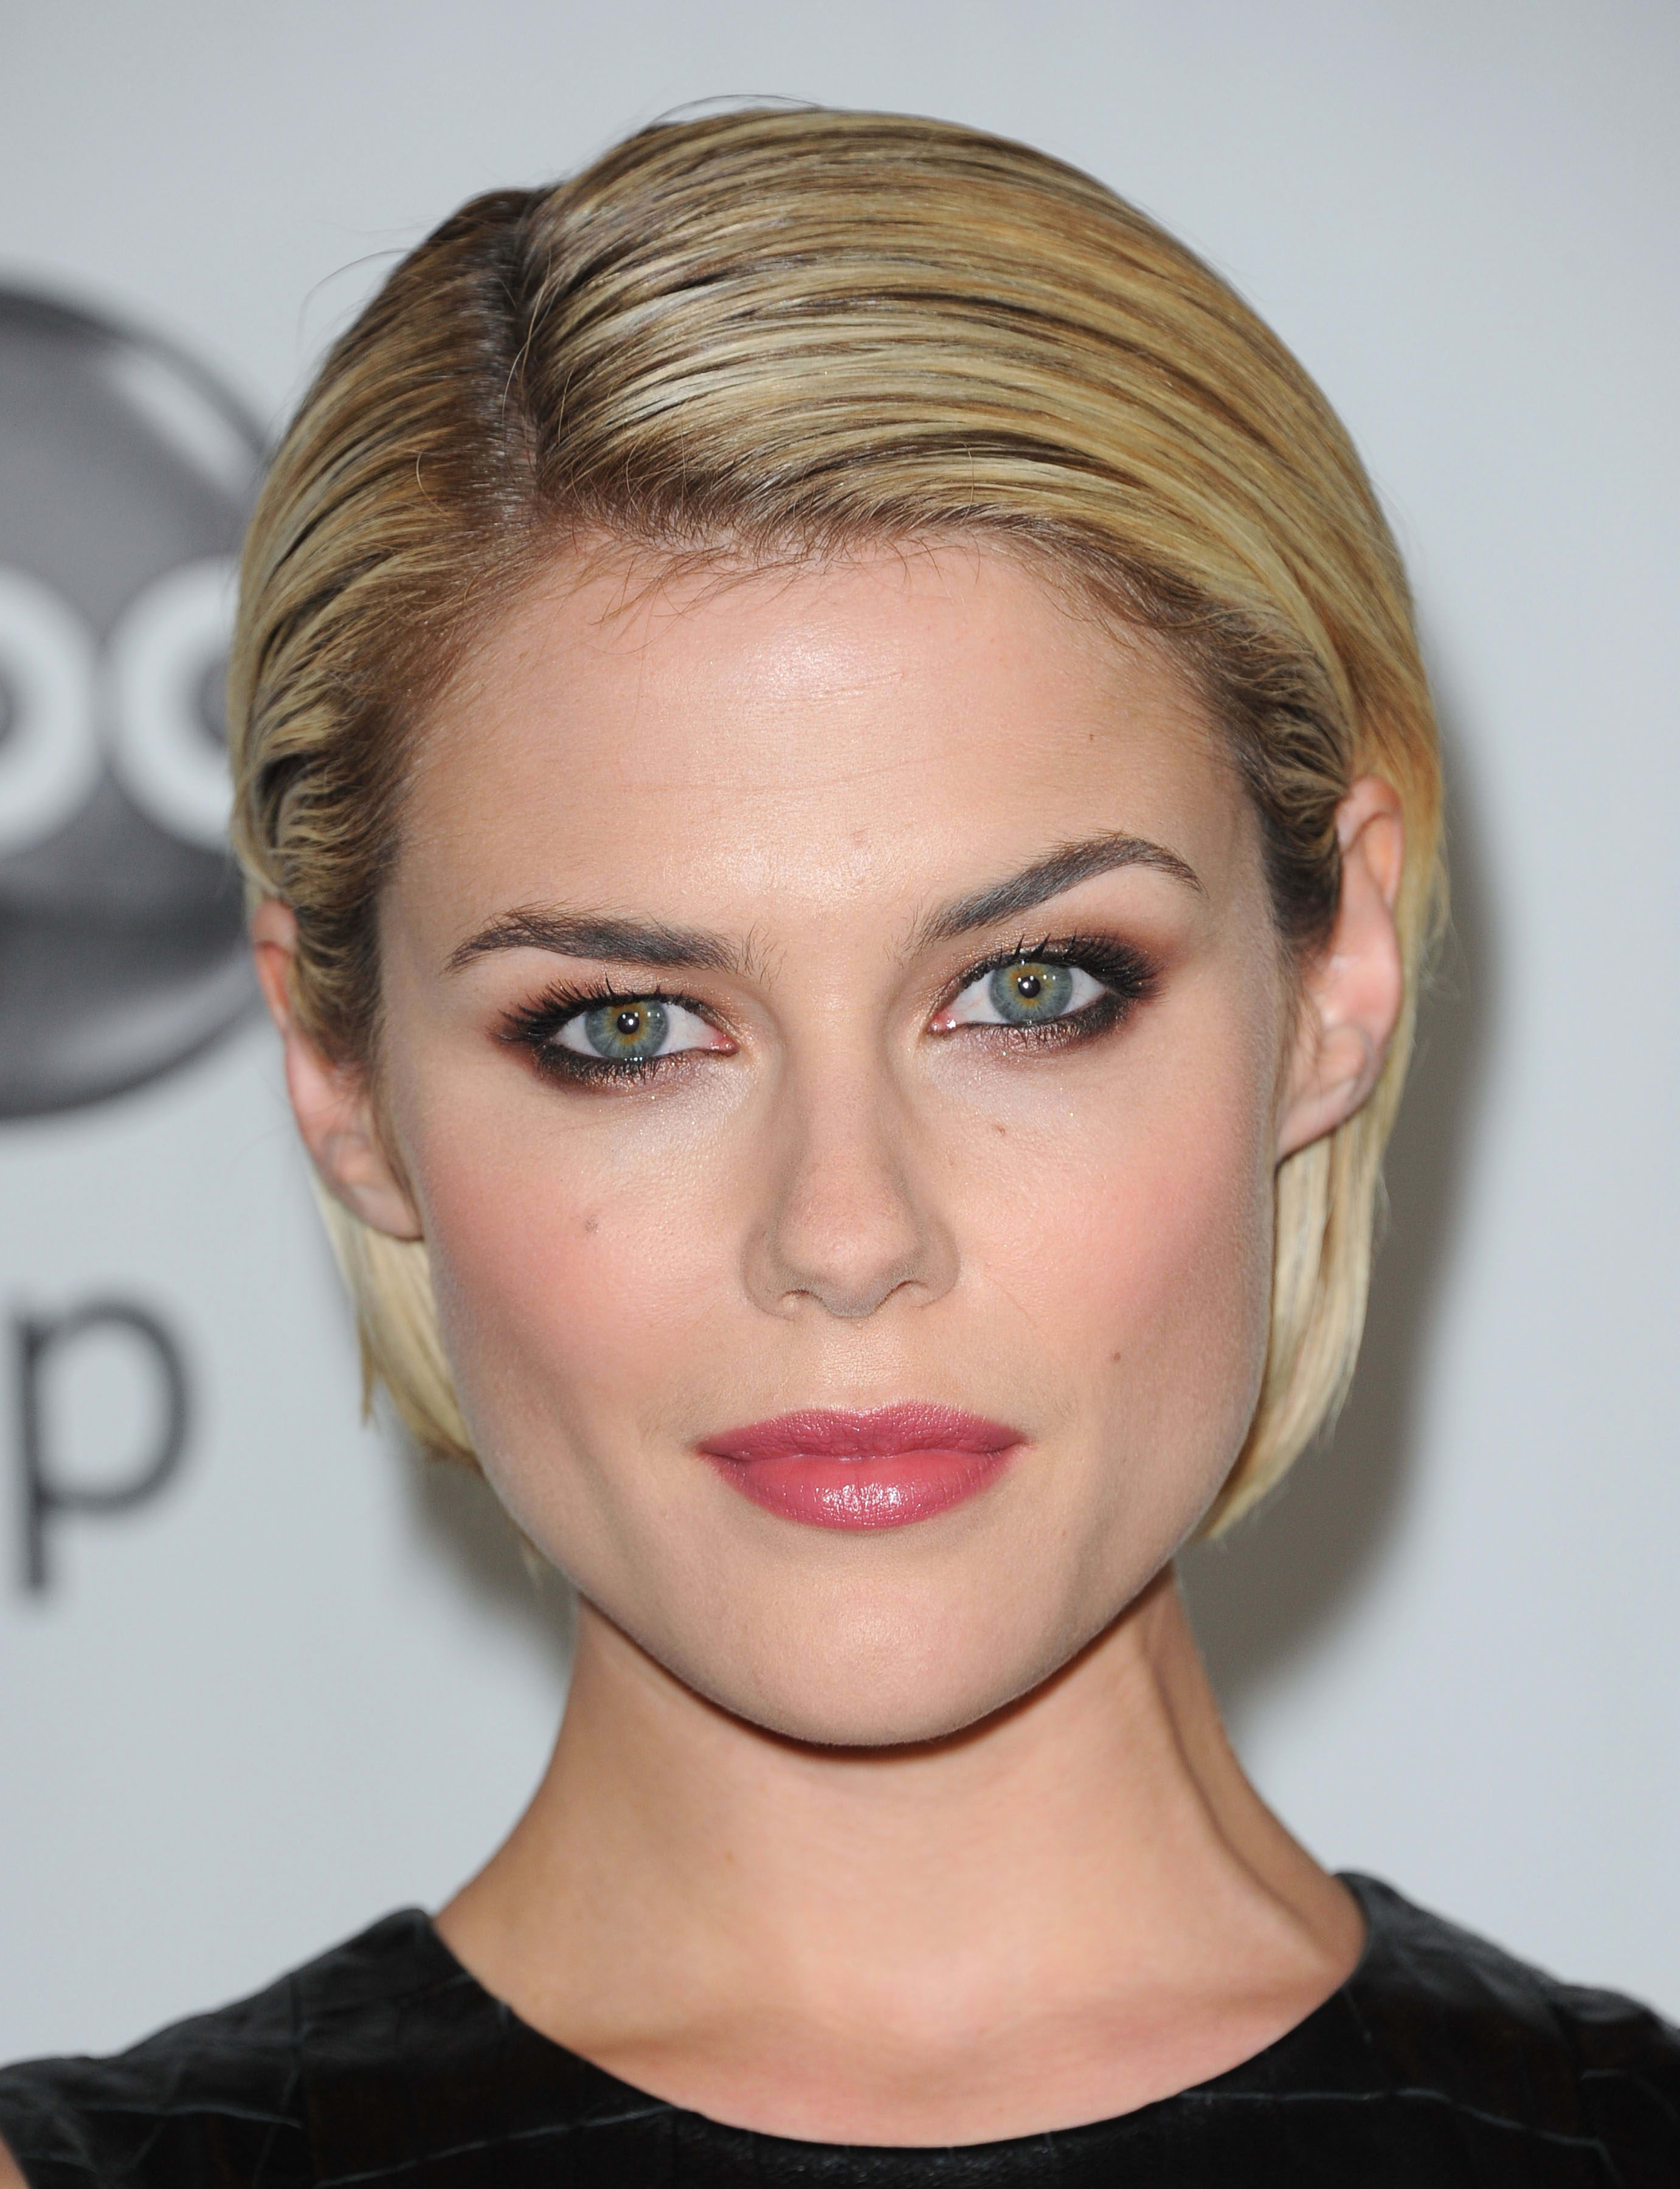 donalyn cruz recommends rachael taylor hot pic